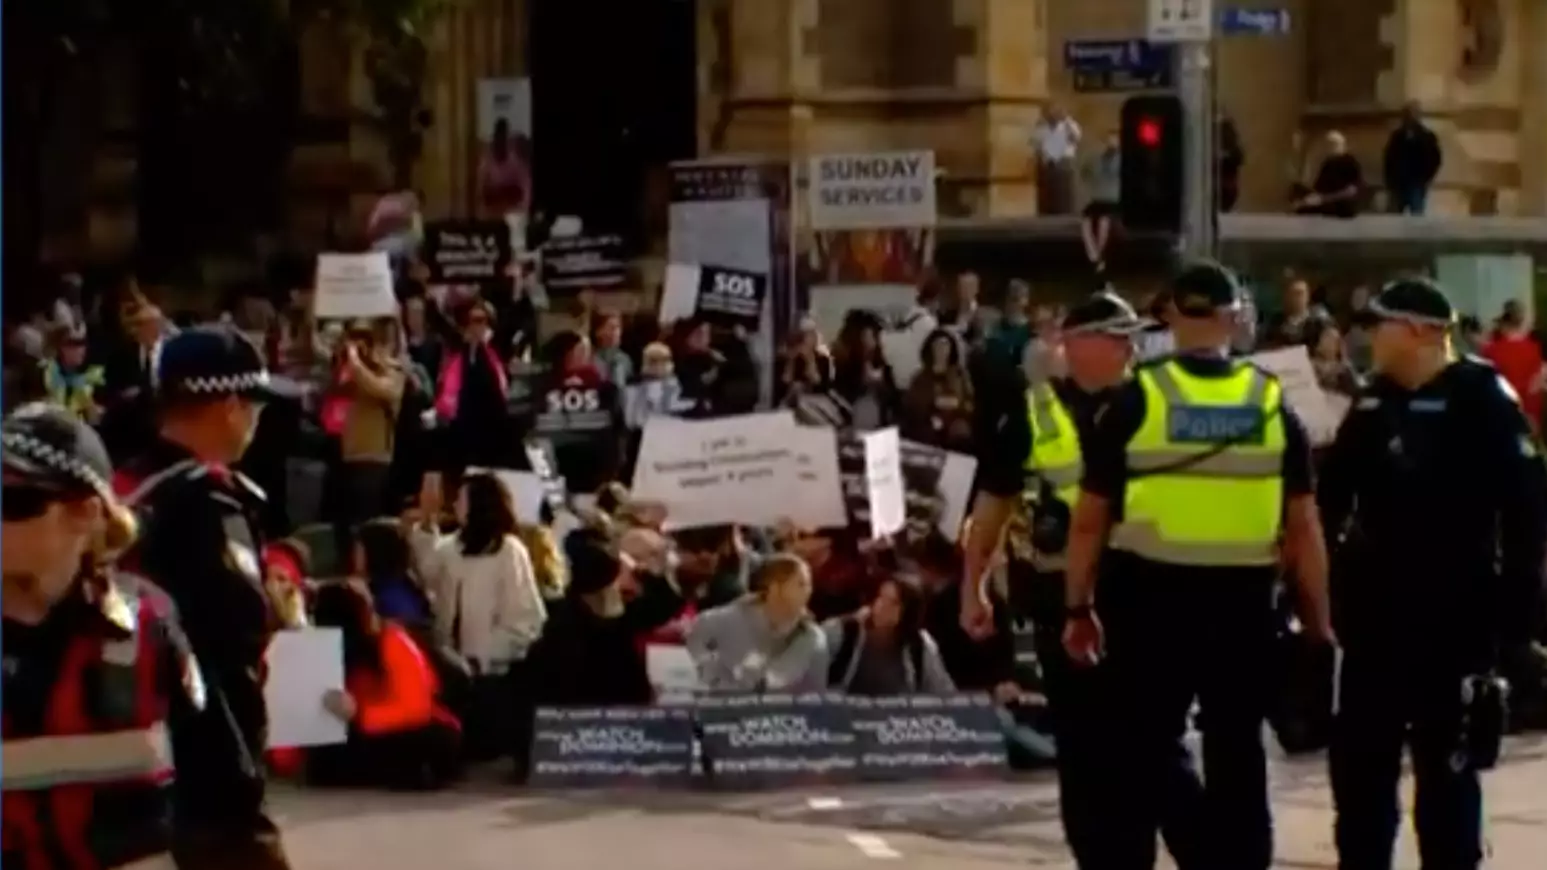 Forty People Have Been Charged With 122 Offences Over Melbourne Vegan Protest